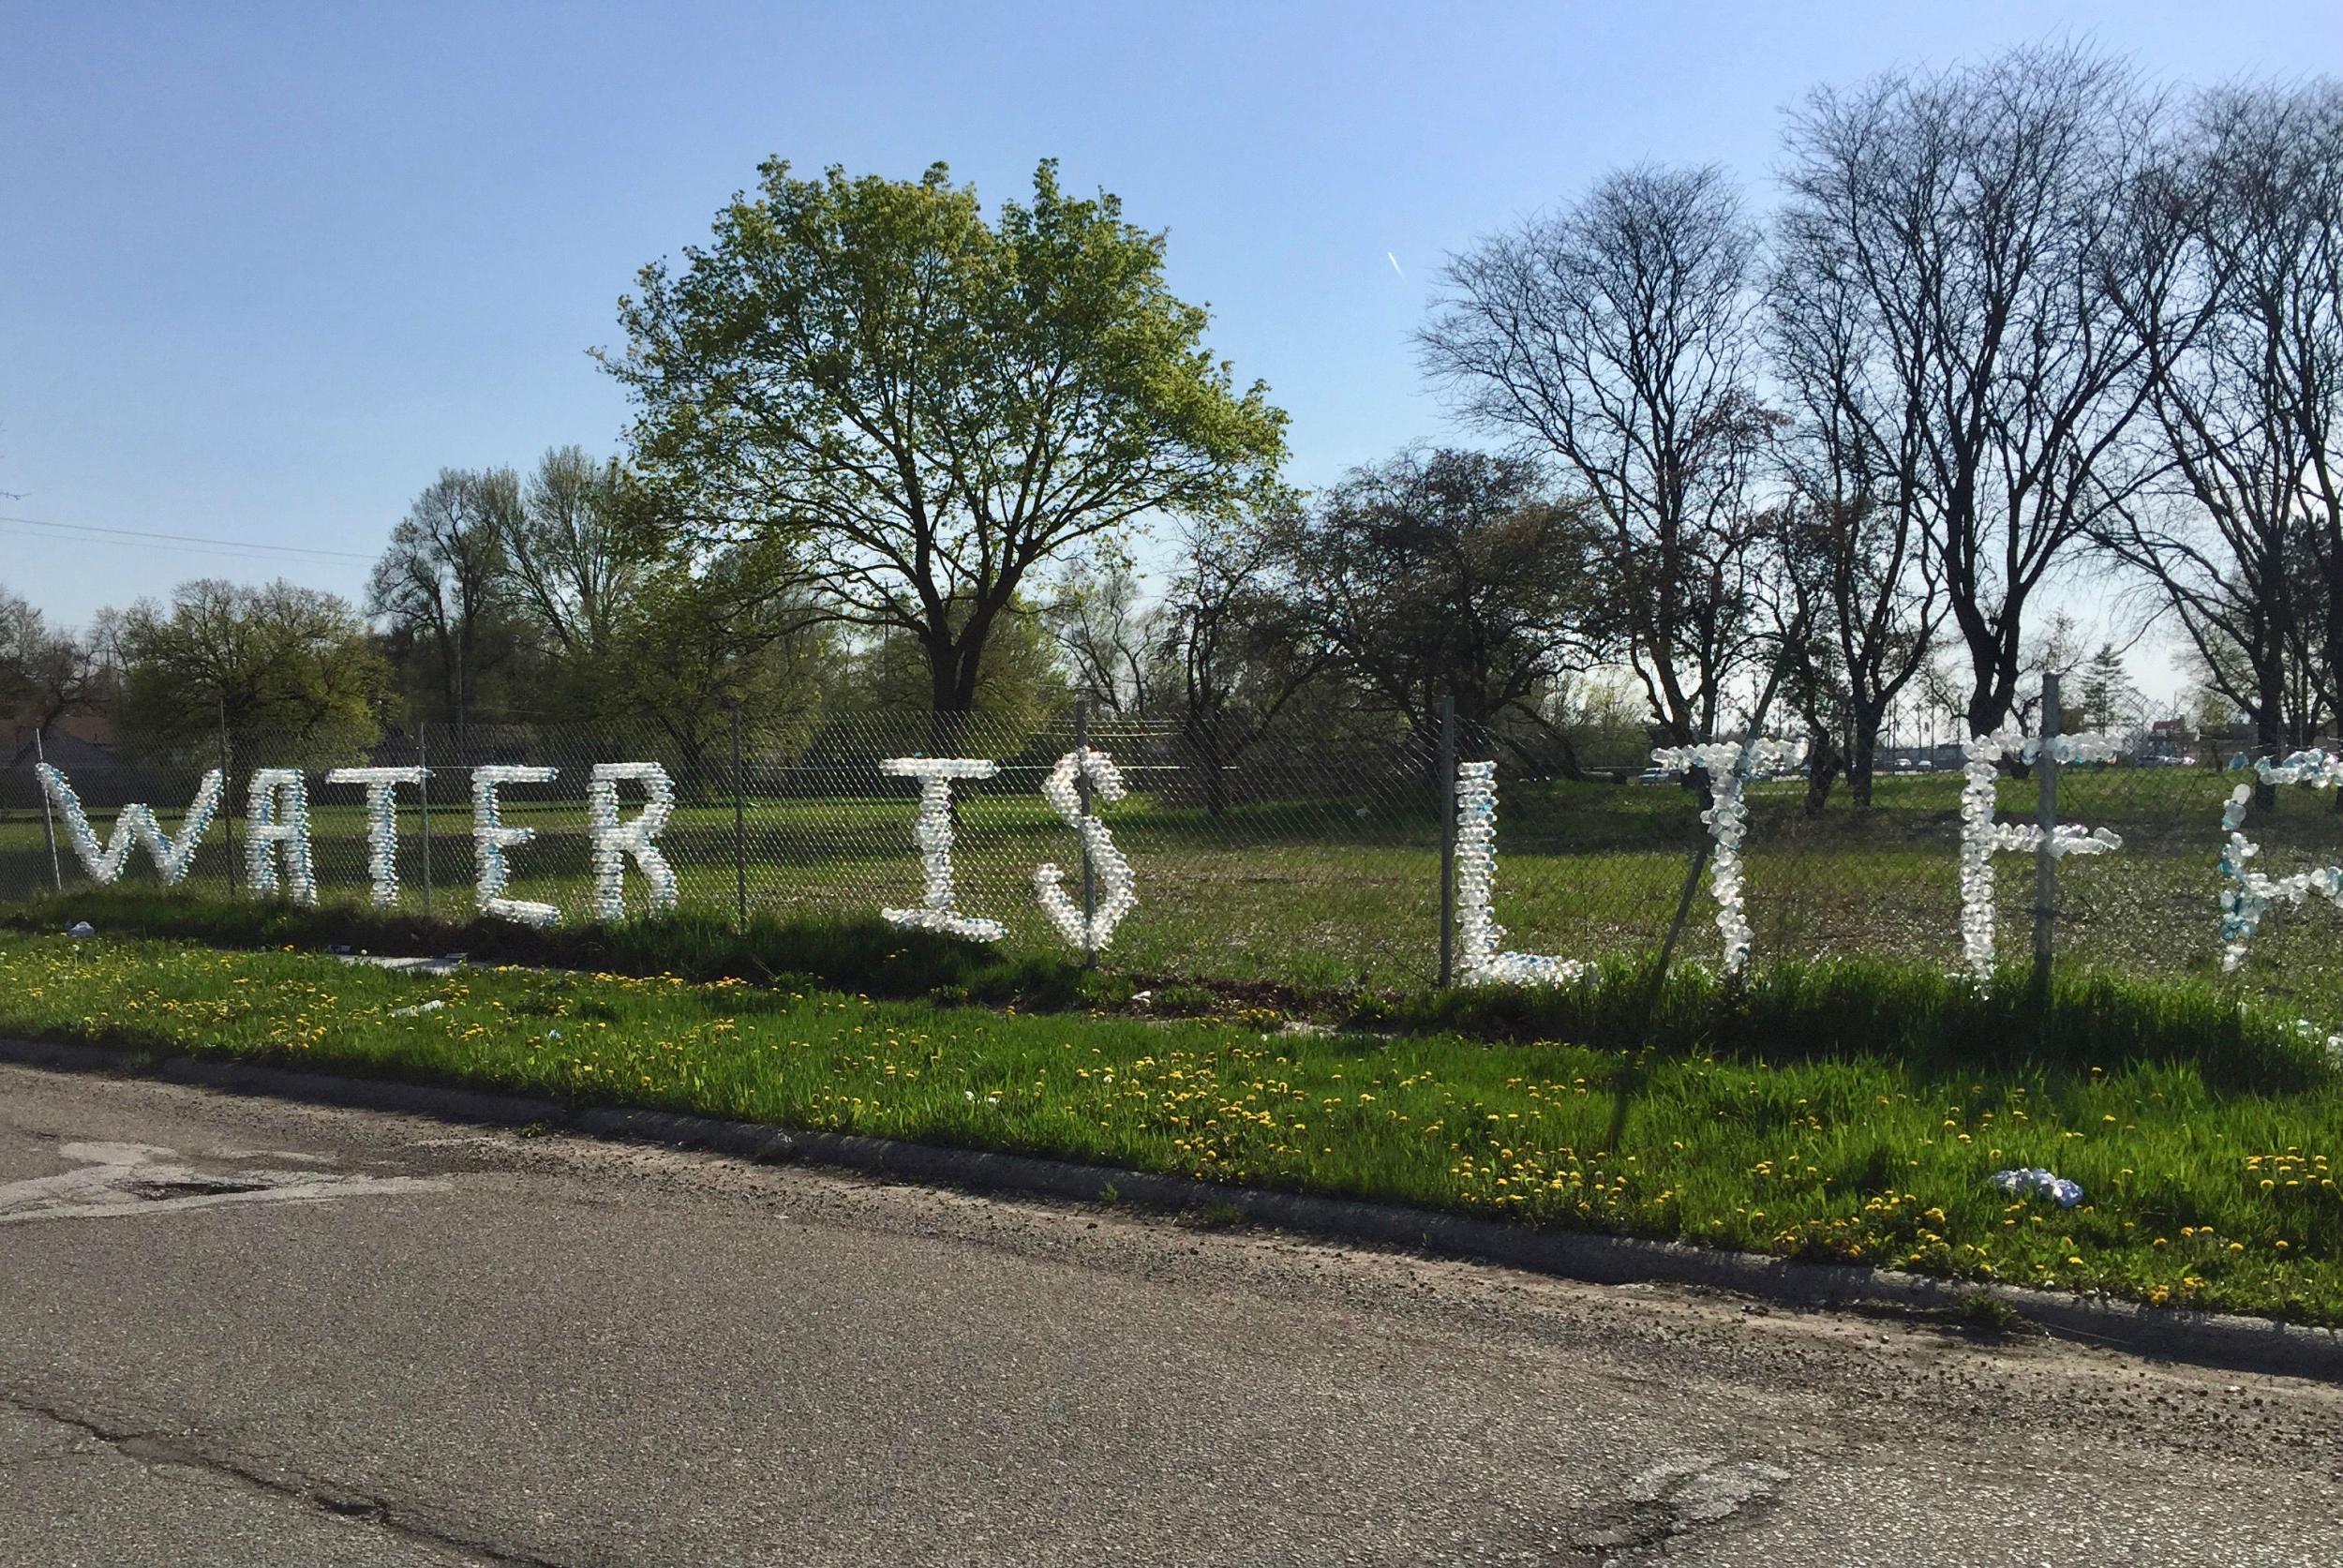 The vast majority of people in Flint say they will never again drink tap water